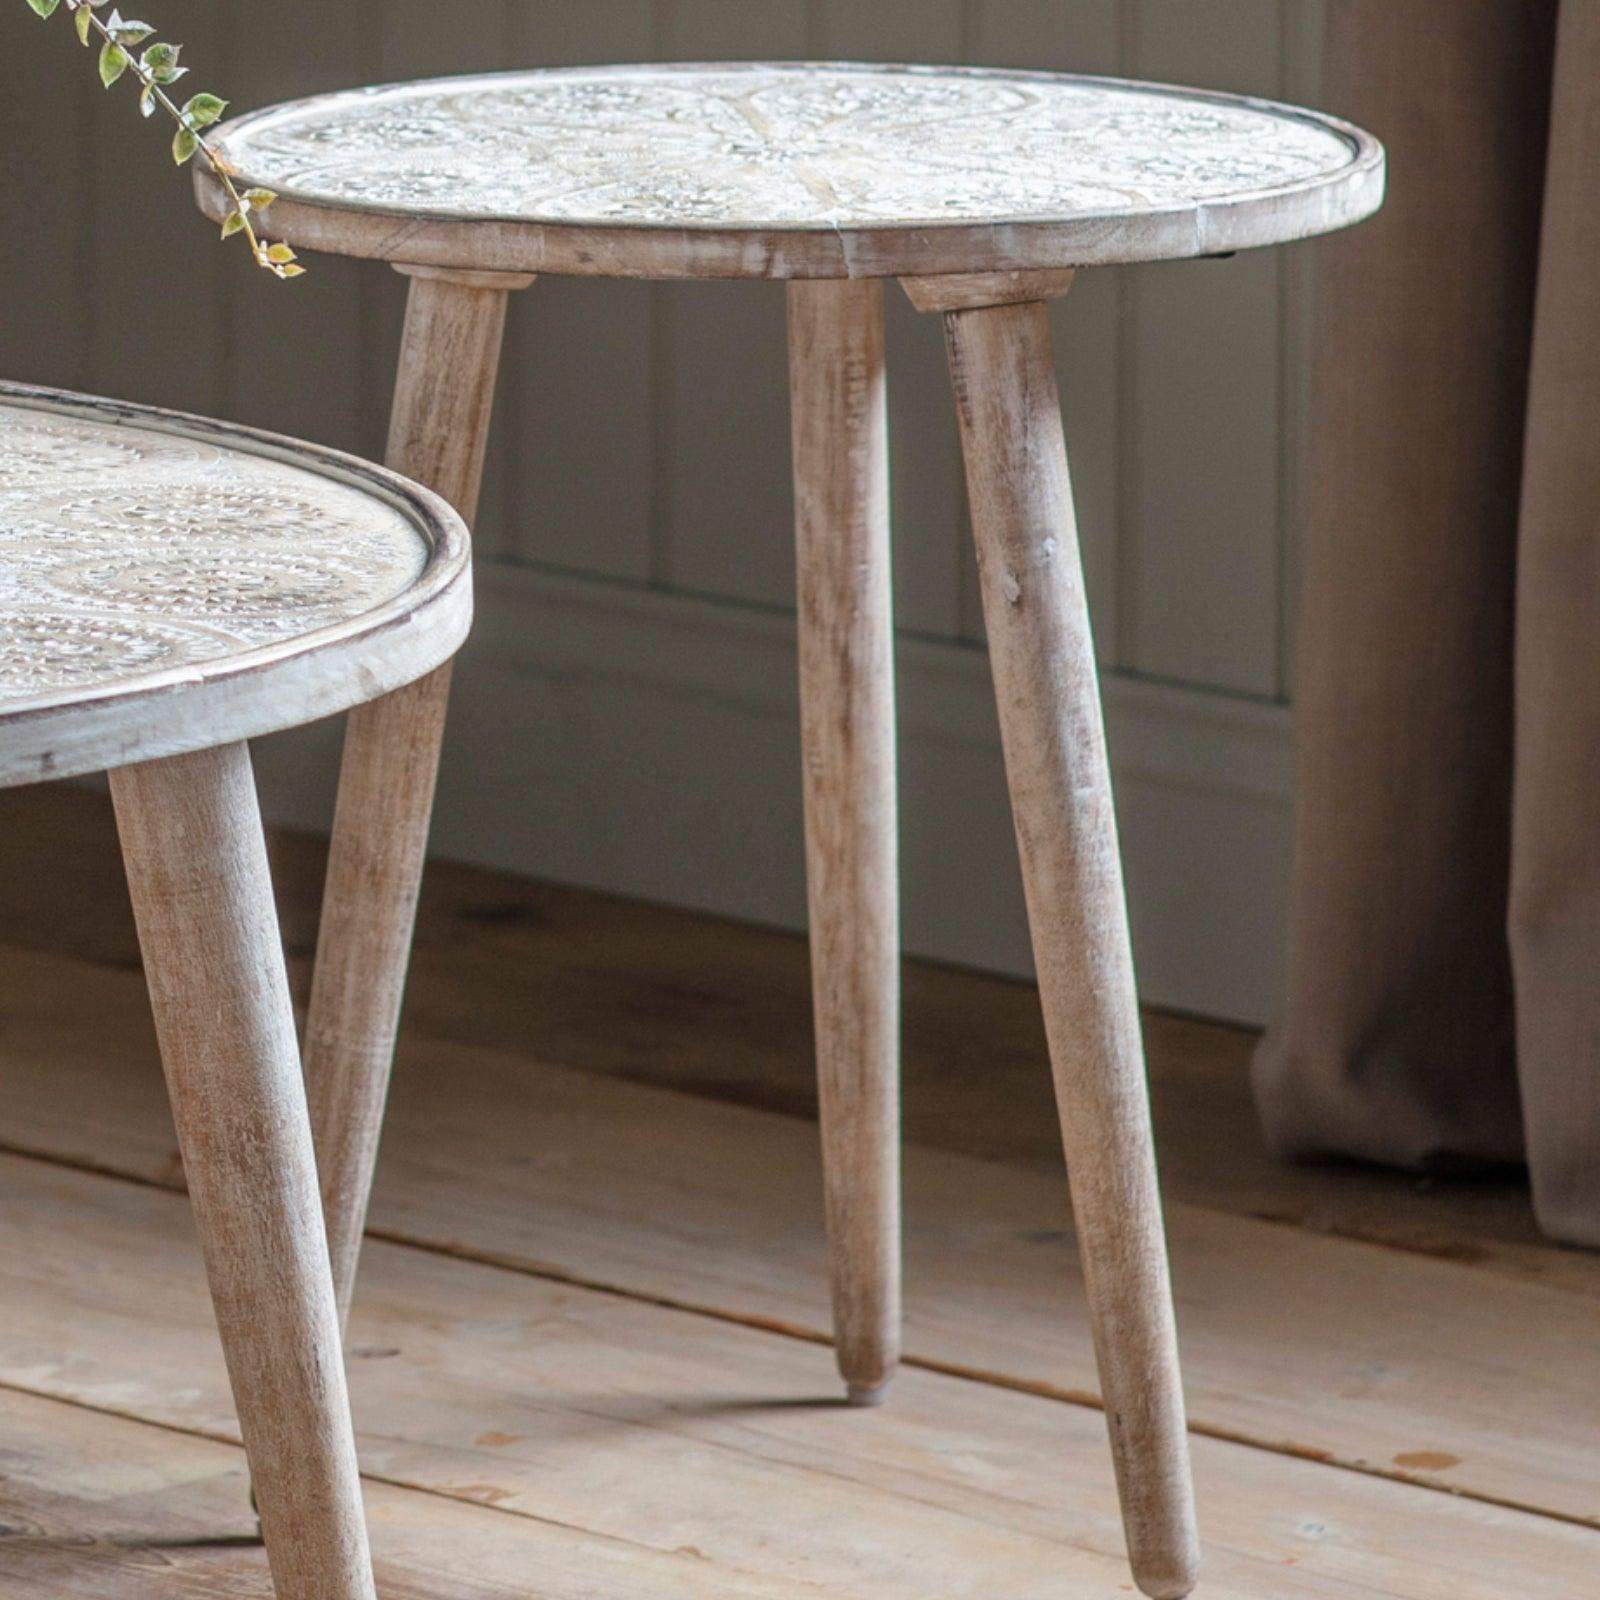 Rustic Wooden Carved Barhan Side Table - The Farthing